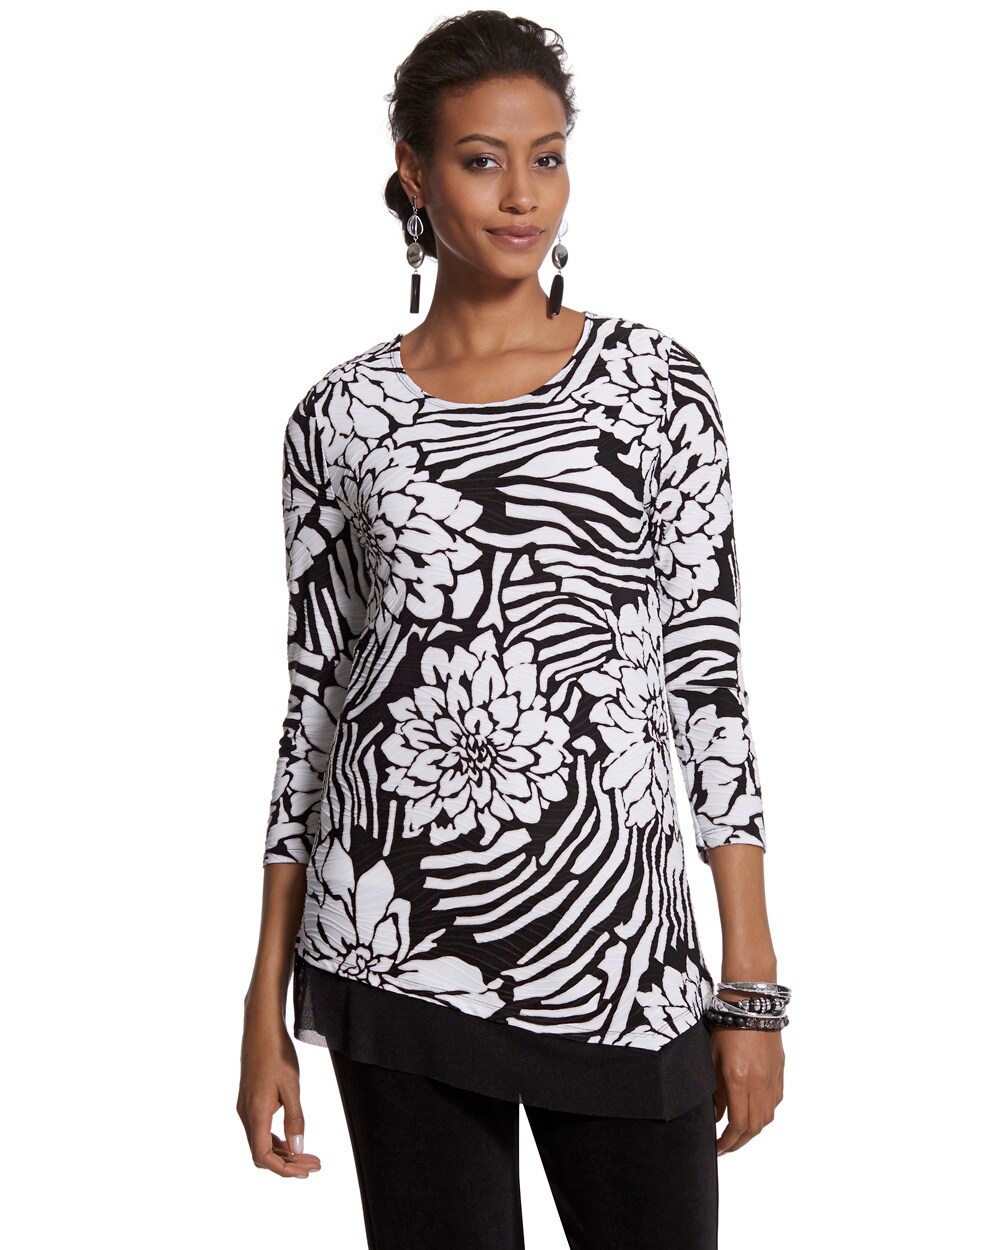 Travelers Collection Animal Floral Mesh Trim Top